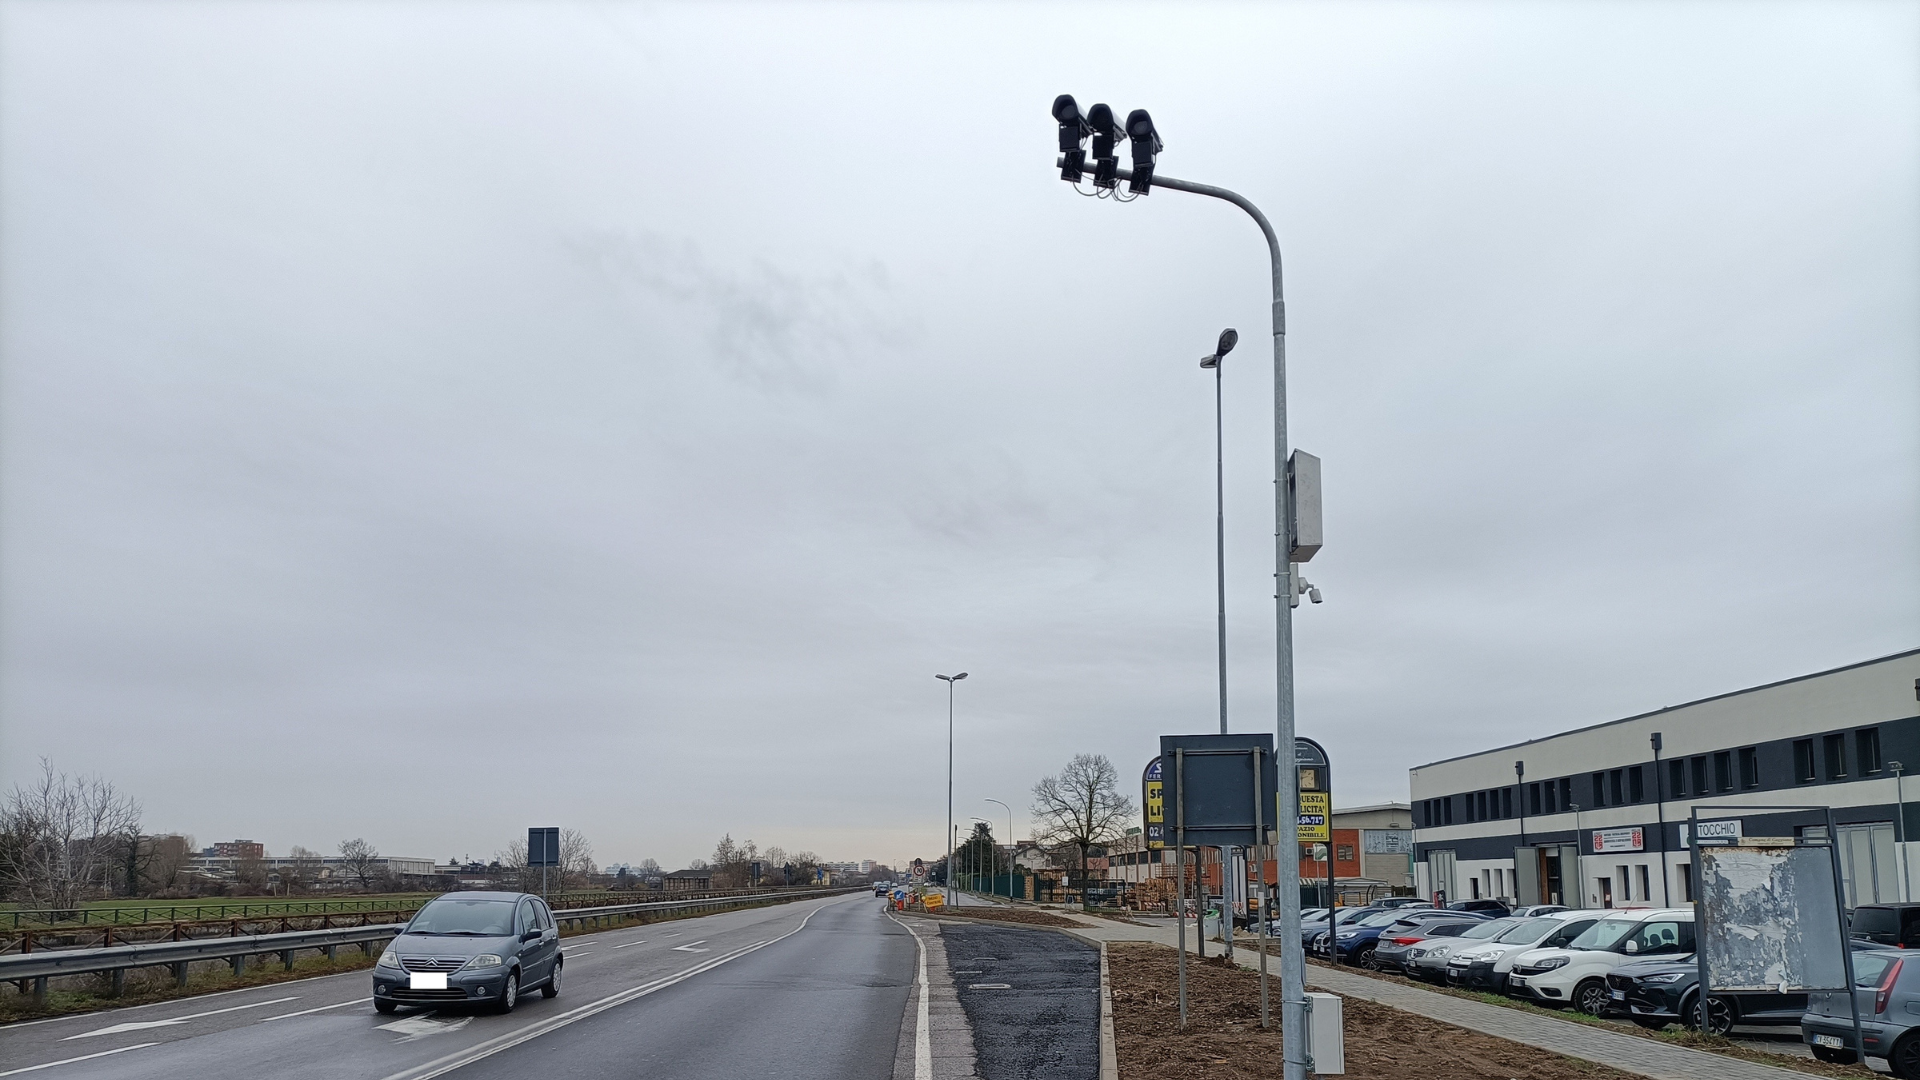 On the S.P. 59, at the intersection with Via Leonardo da Vinci,  a new traffic light control system comes into operation